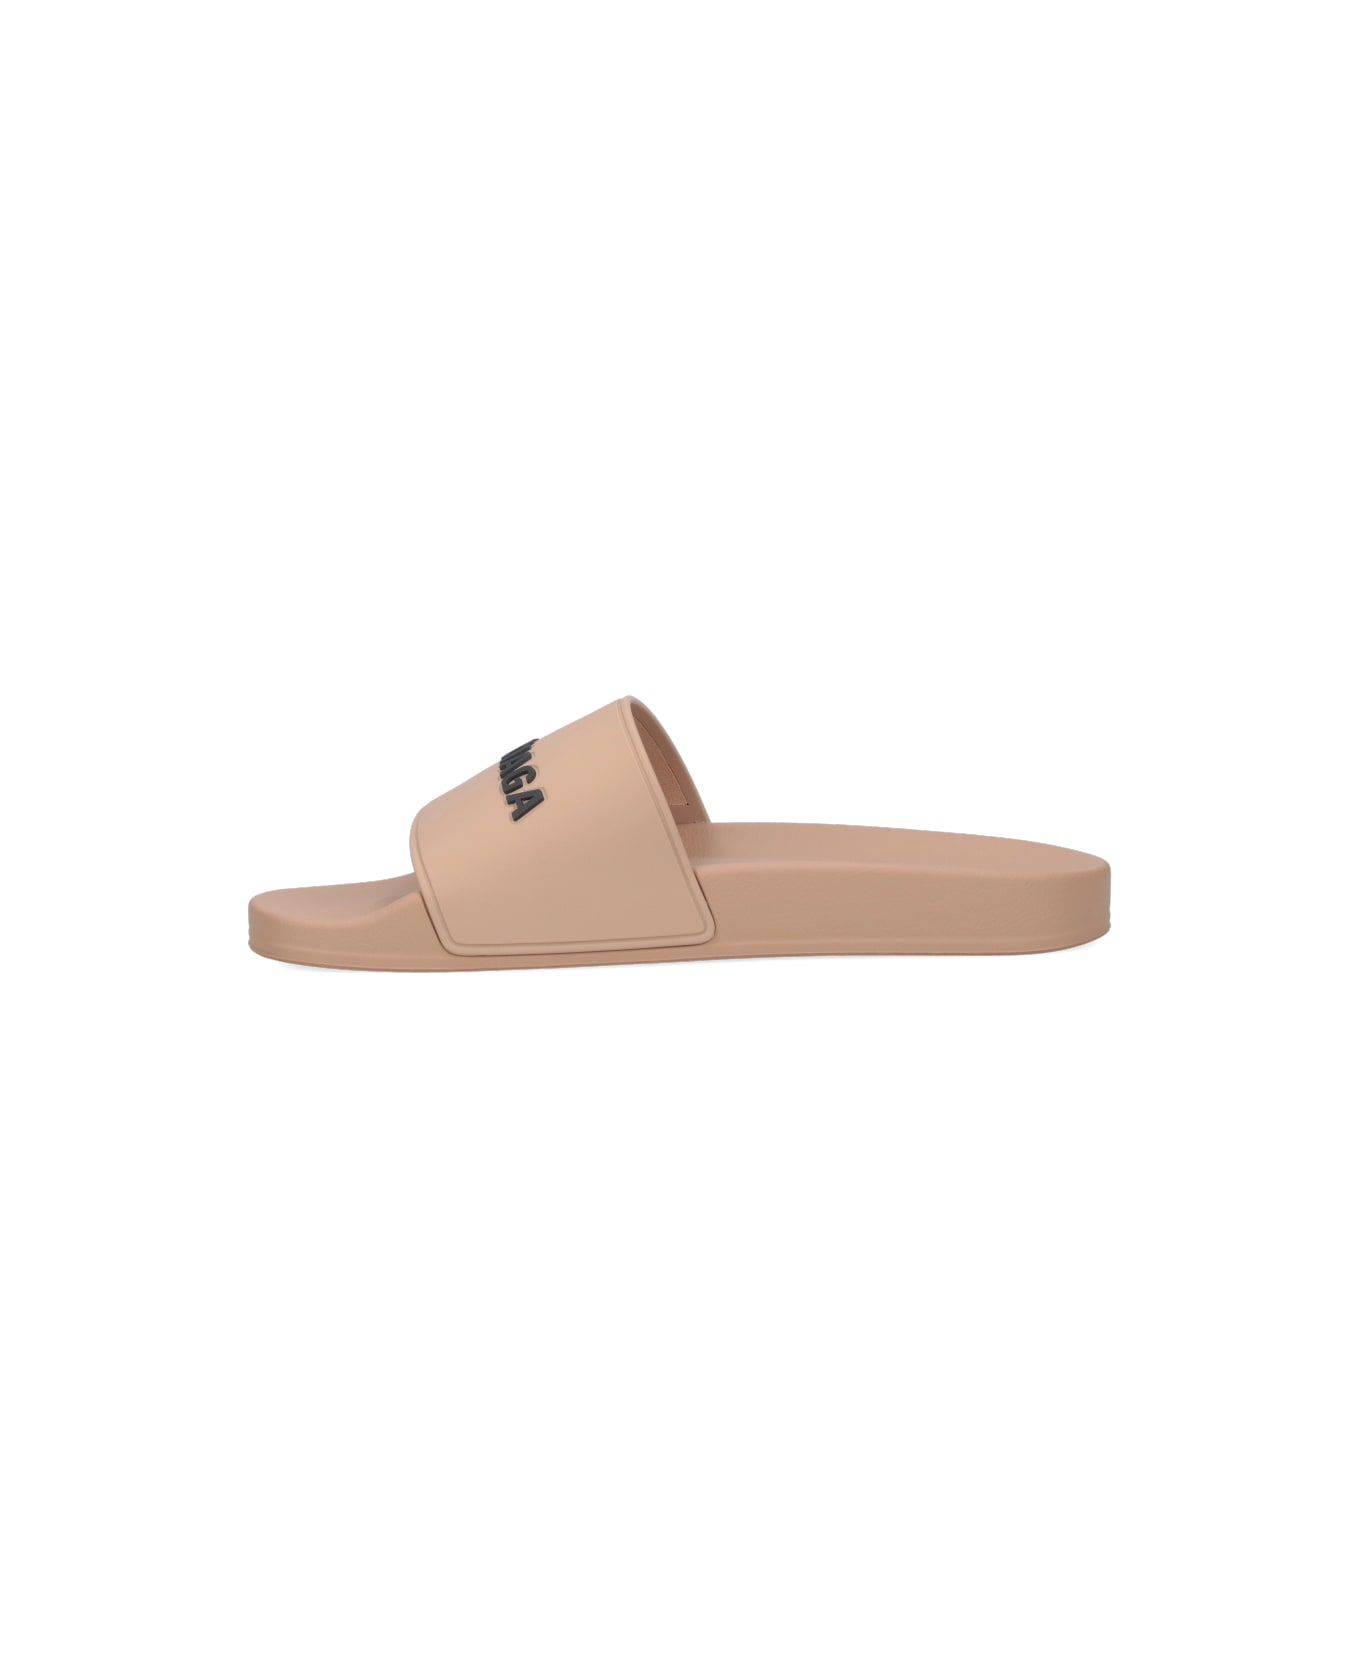 Balenciaga Slide Sandals With Logo In Rubber Man - Nude & Neutrals その他各種シューズ